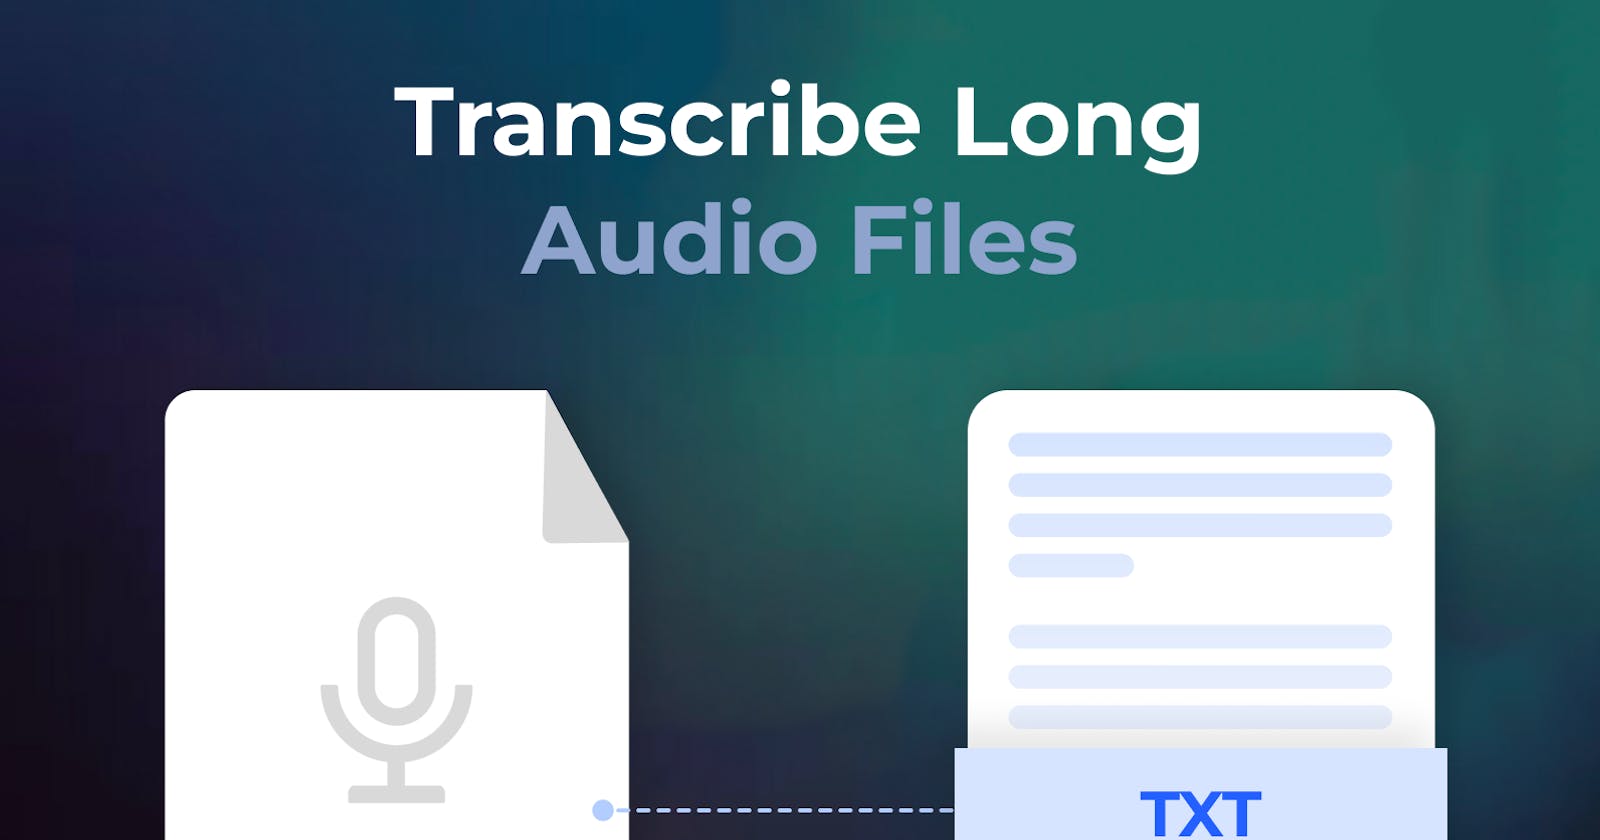 How to transcribe long audio files?